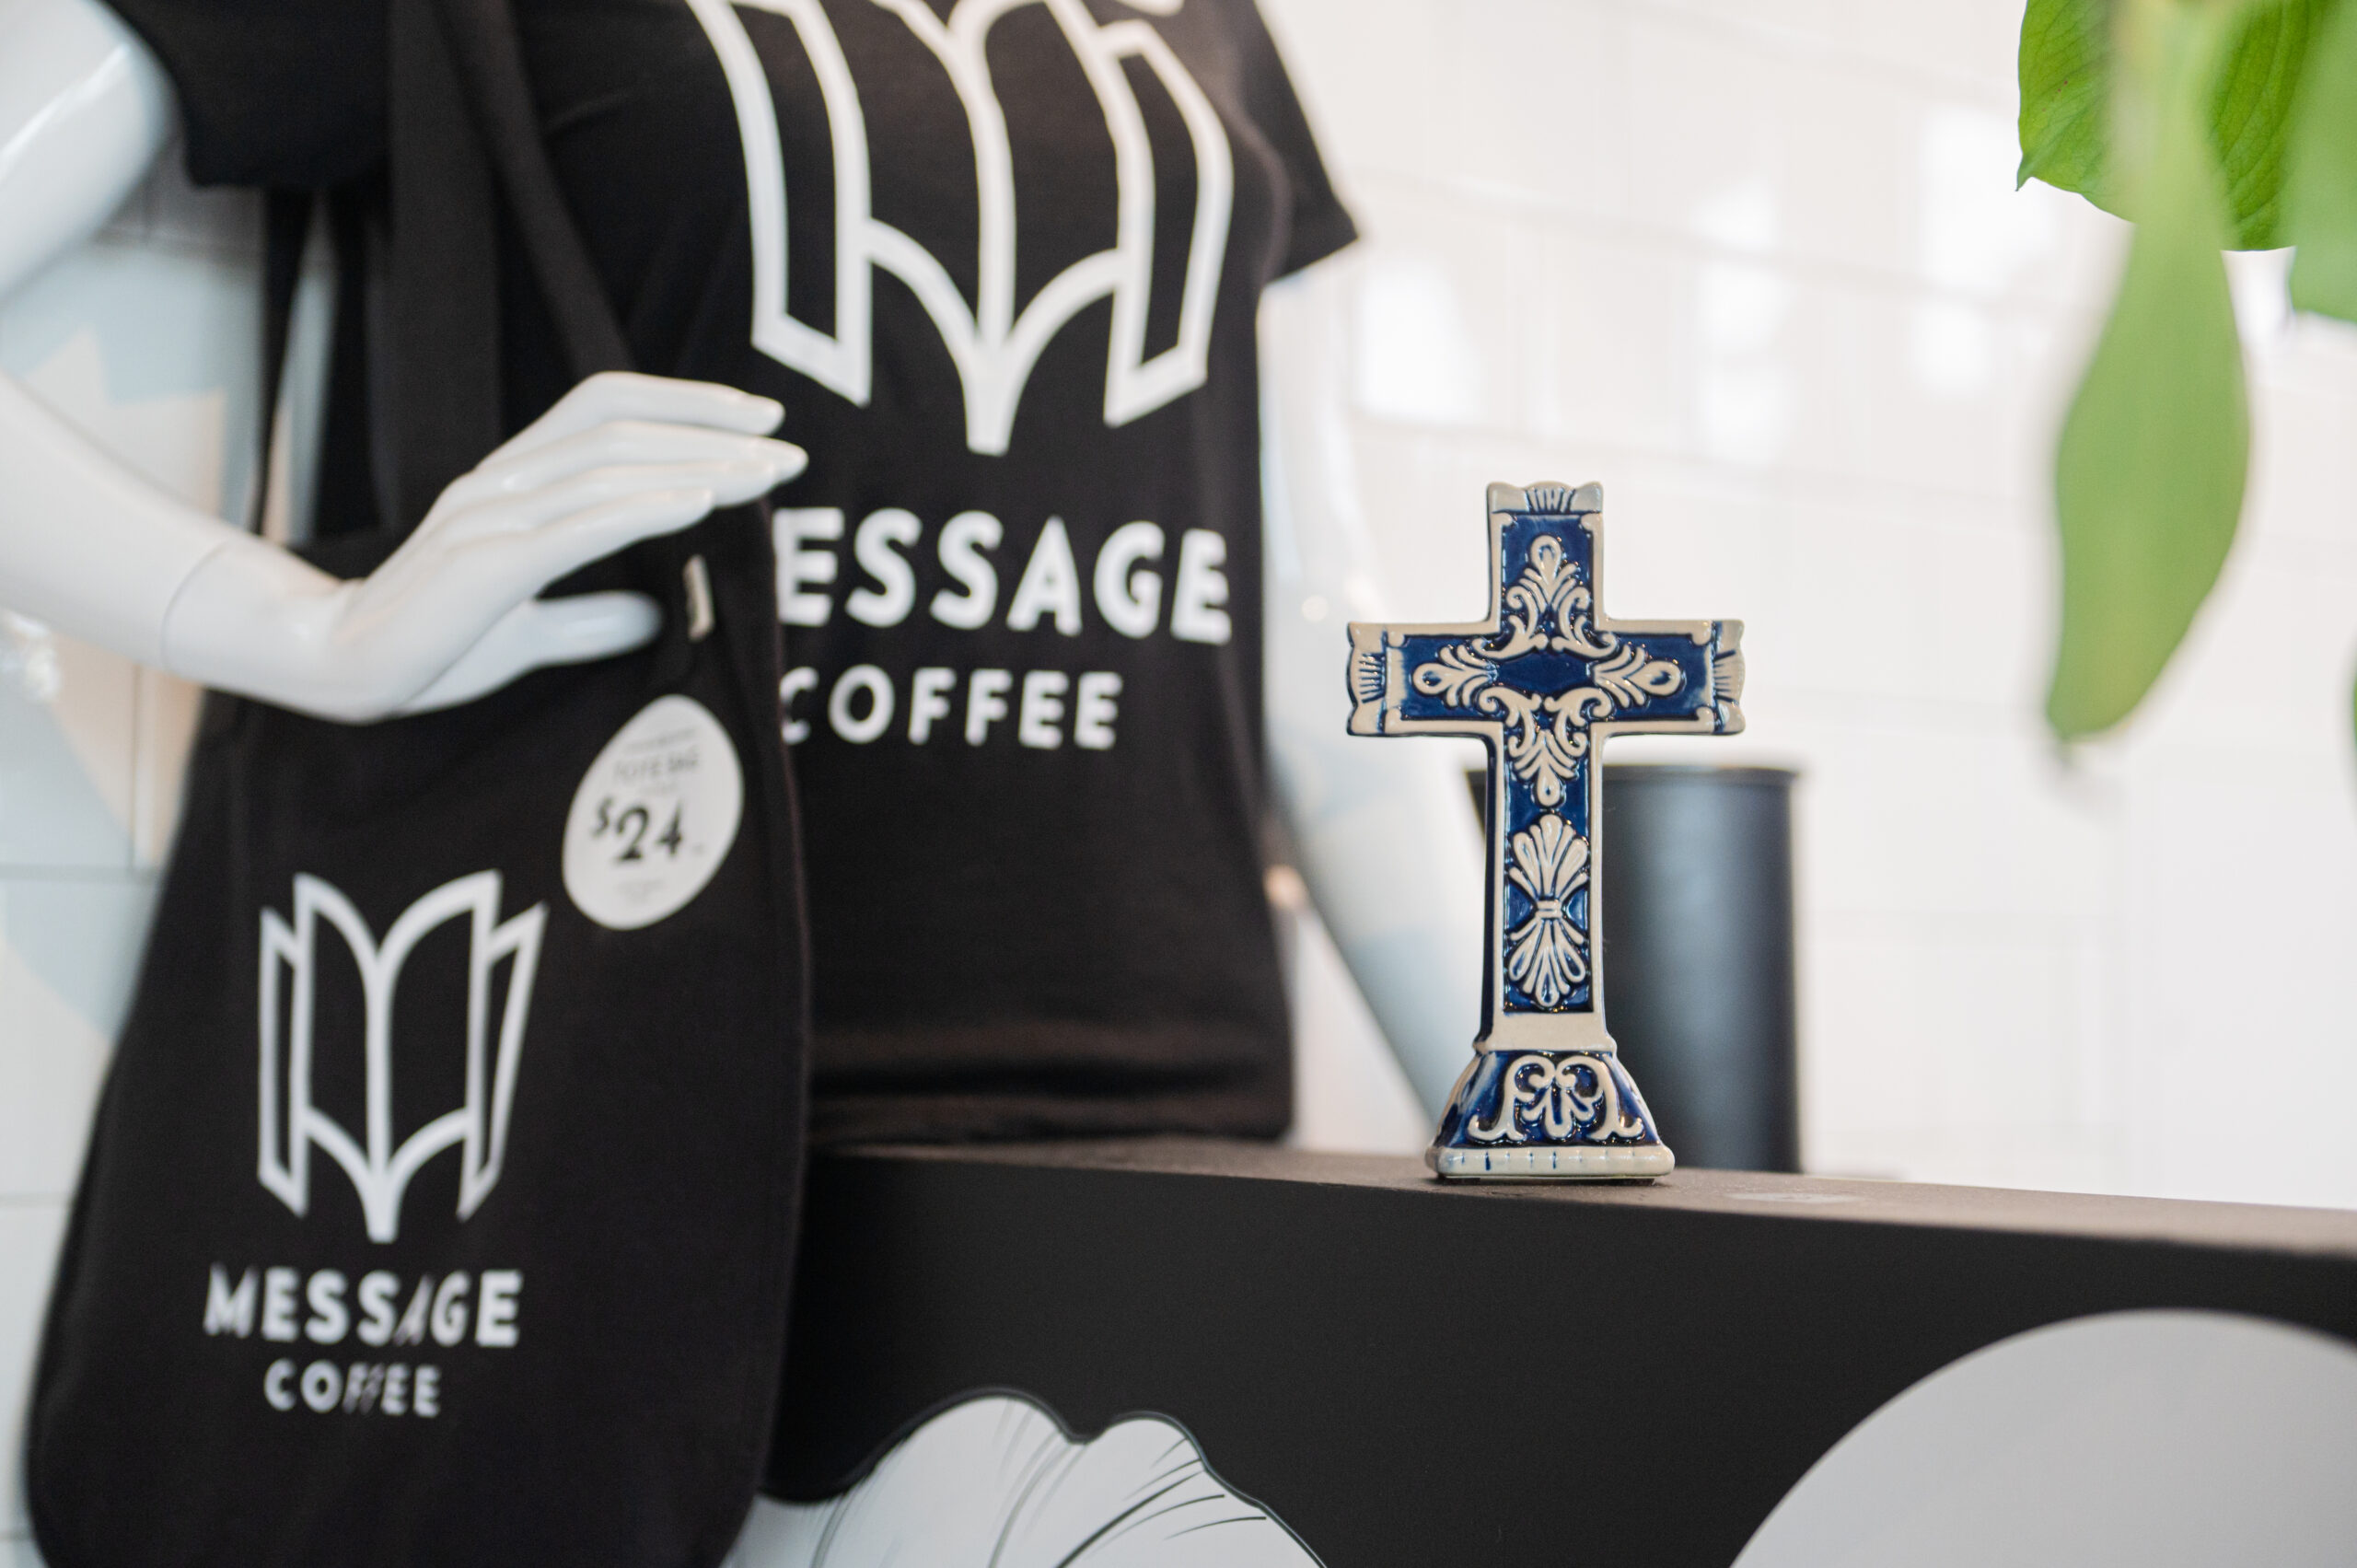 Message Coffee aspires to share Christian love to people of al beliefs and backgrounds.